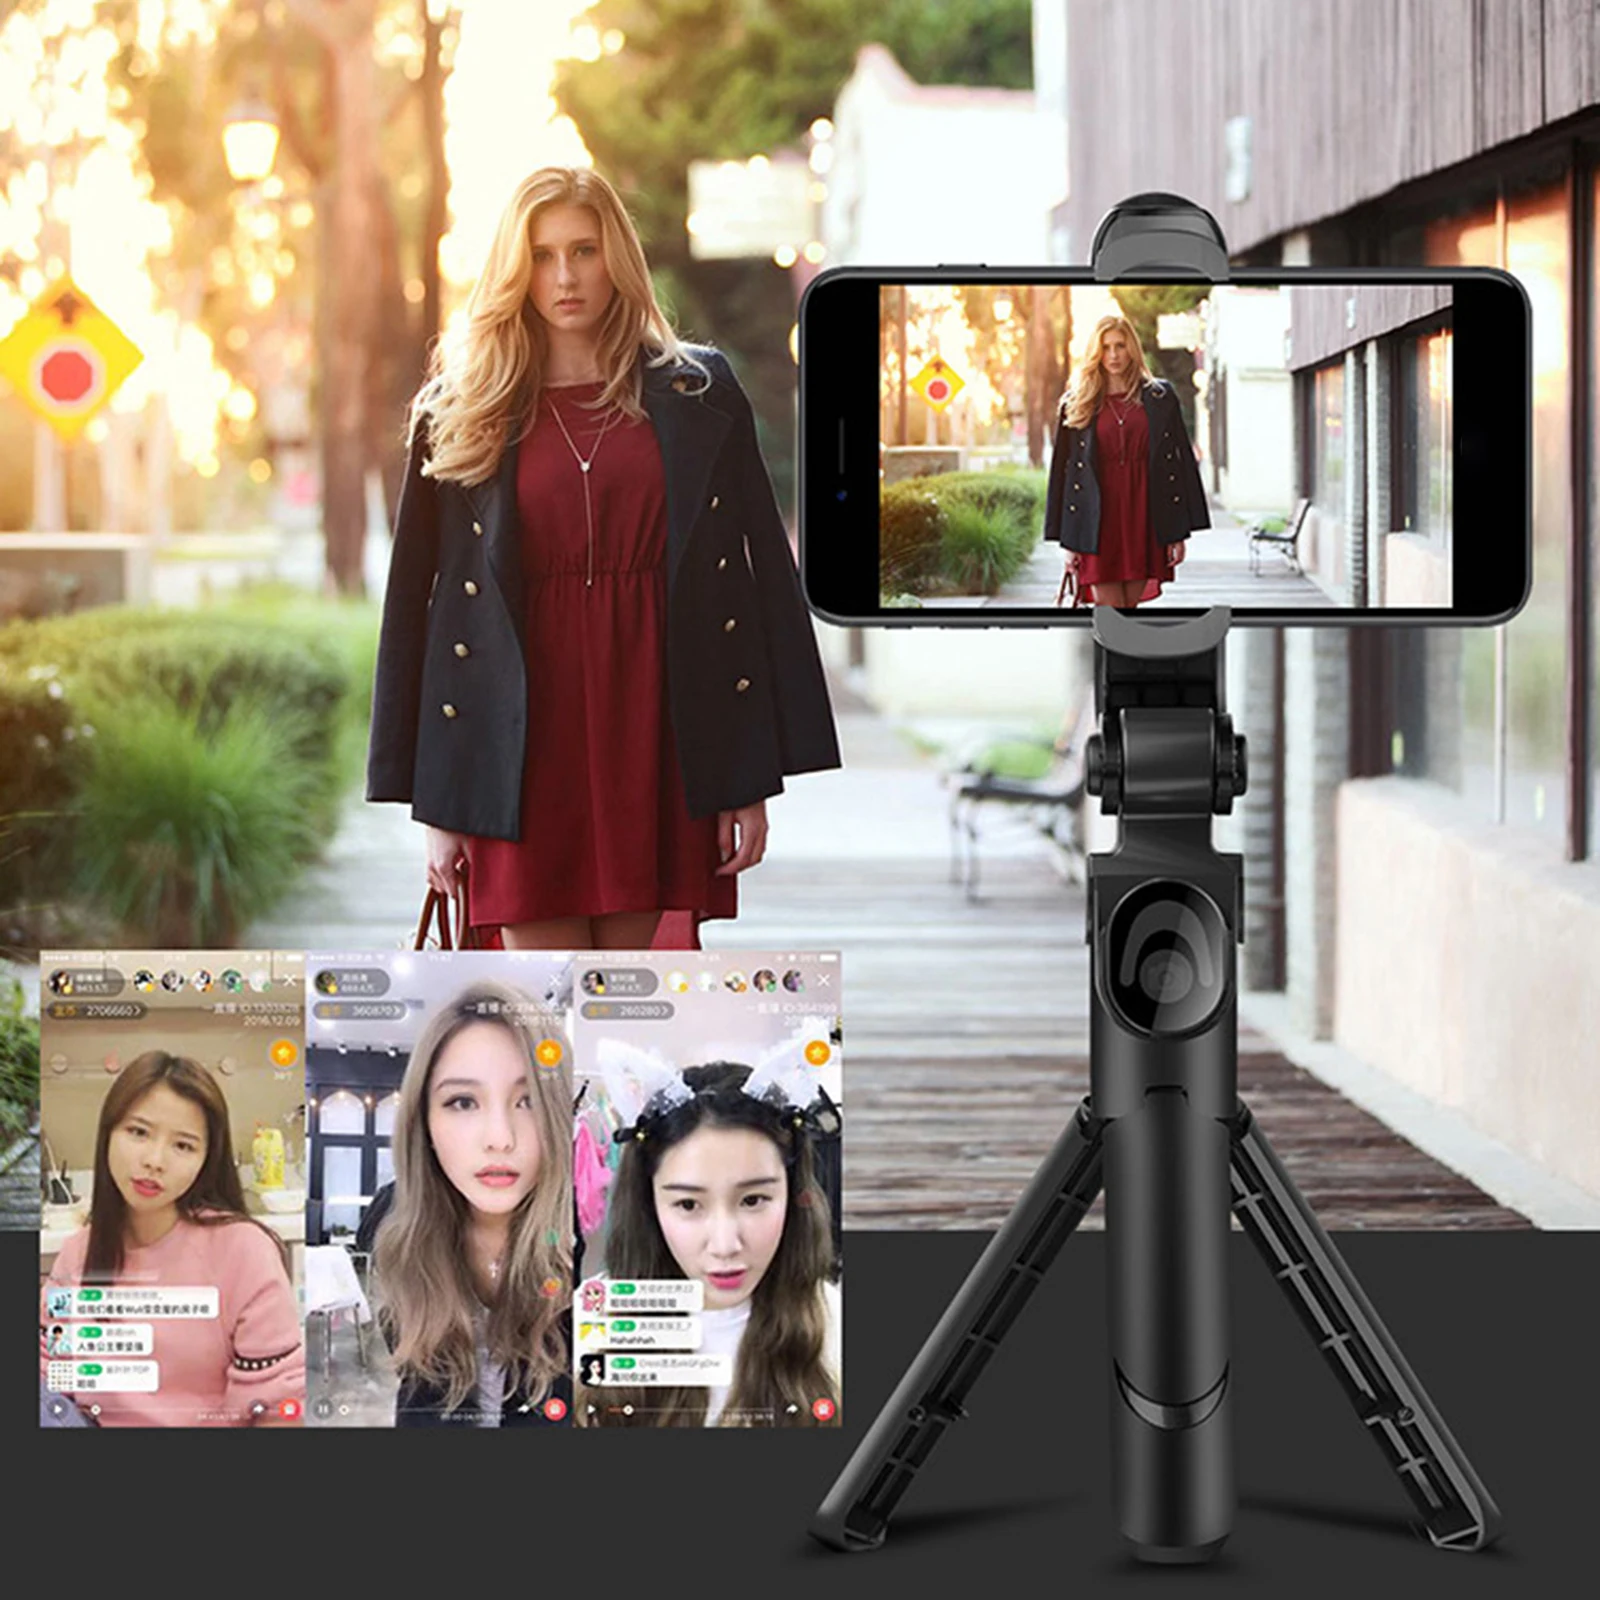 XT09 Compact Extendable Selfie Stick Tripod Phone Holder with Bluetooth Remote for Recording Videos